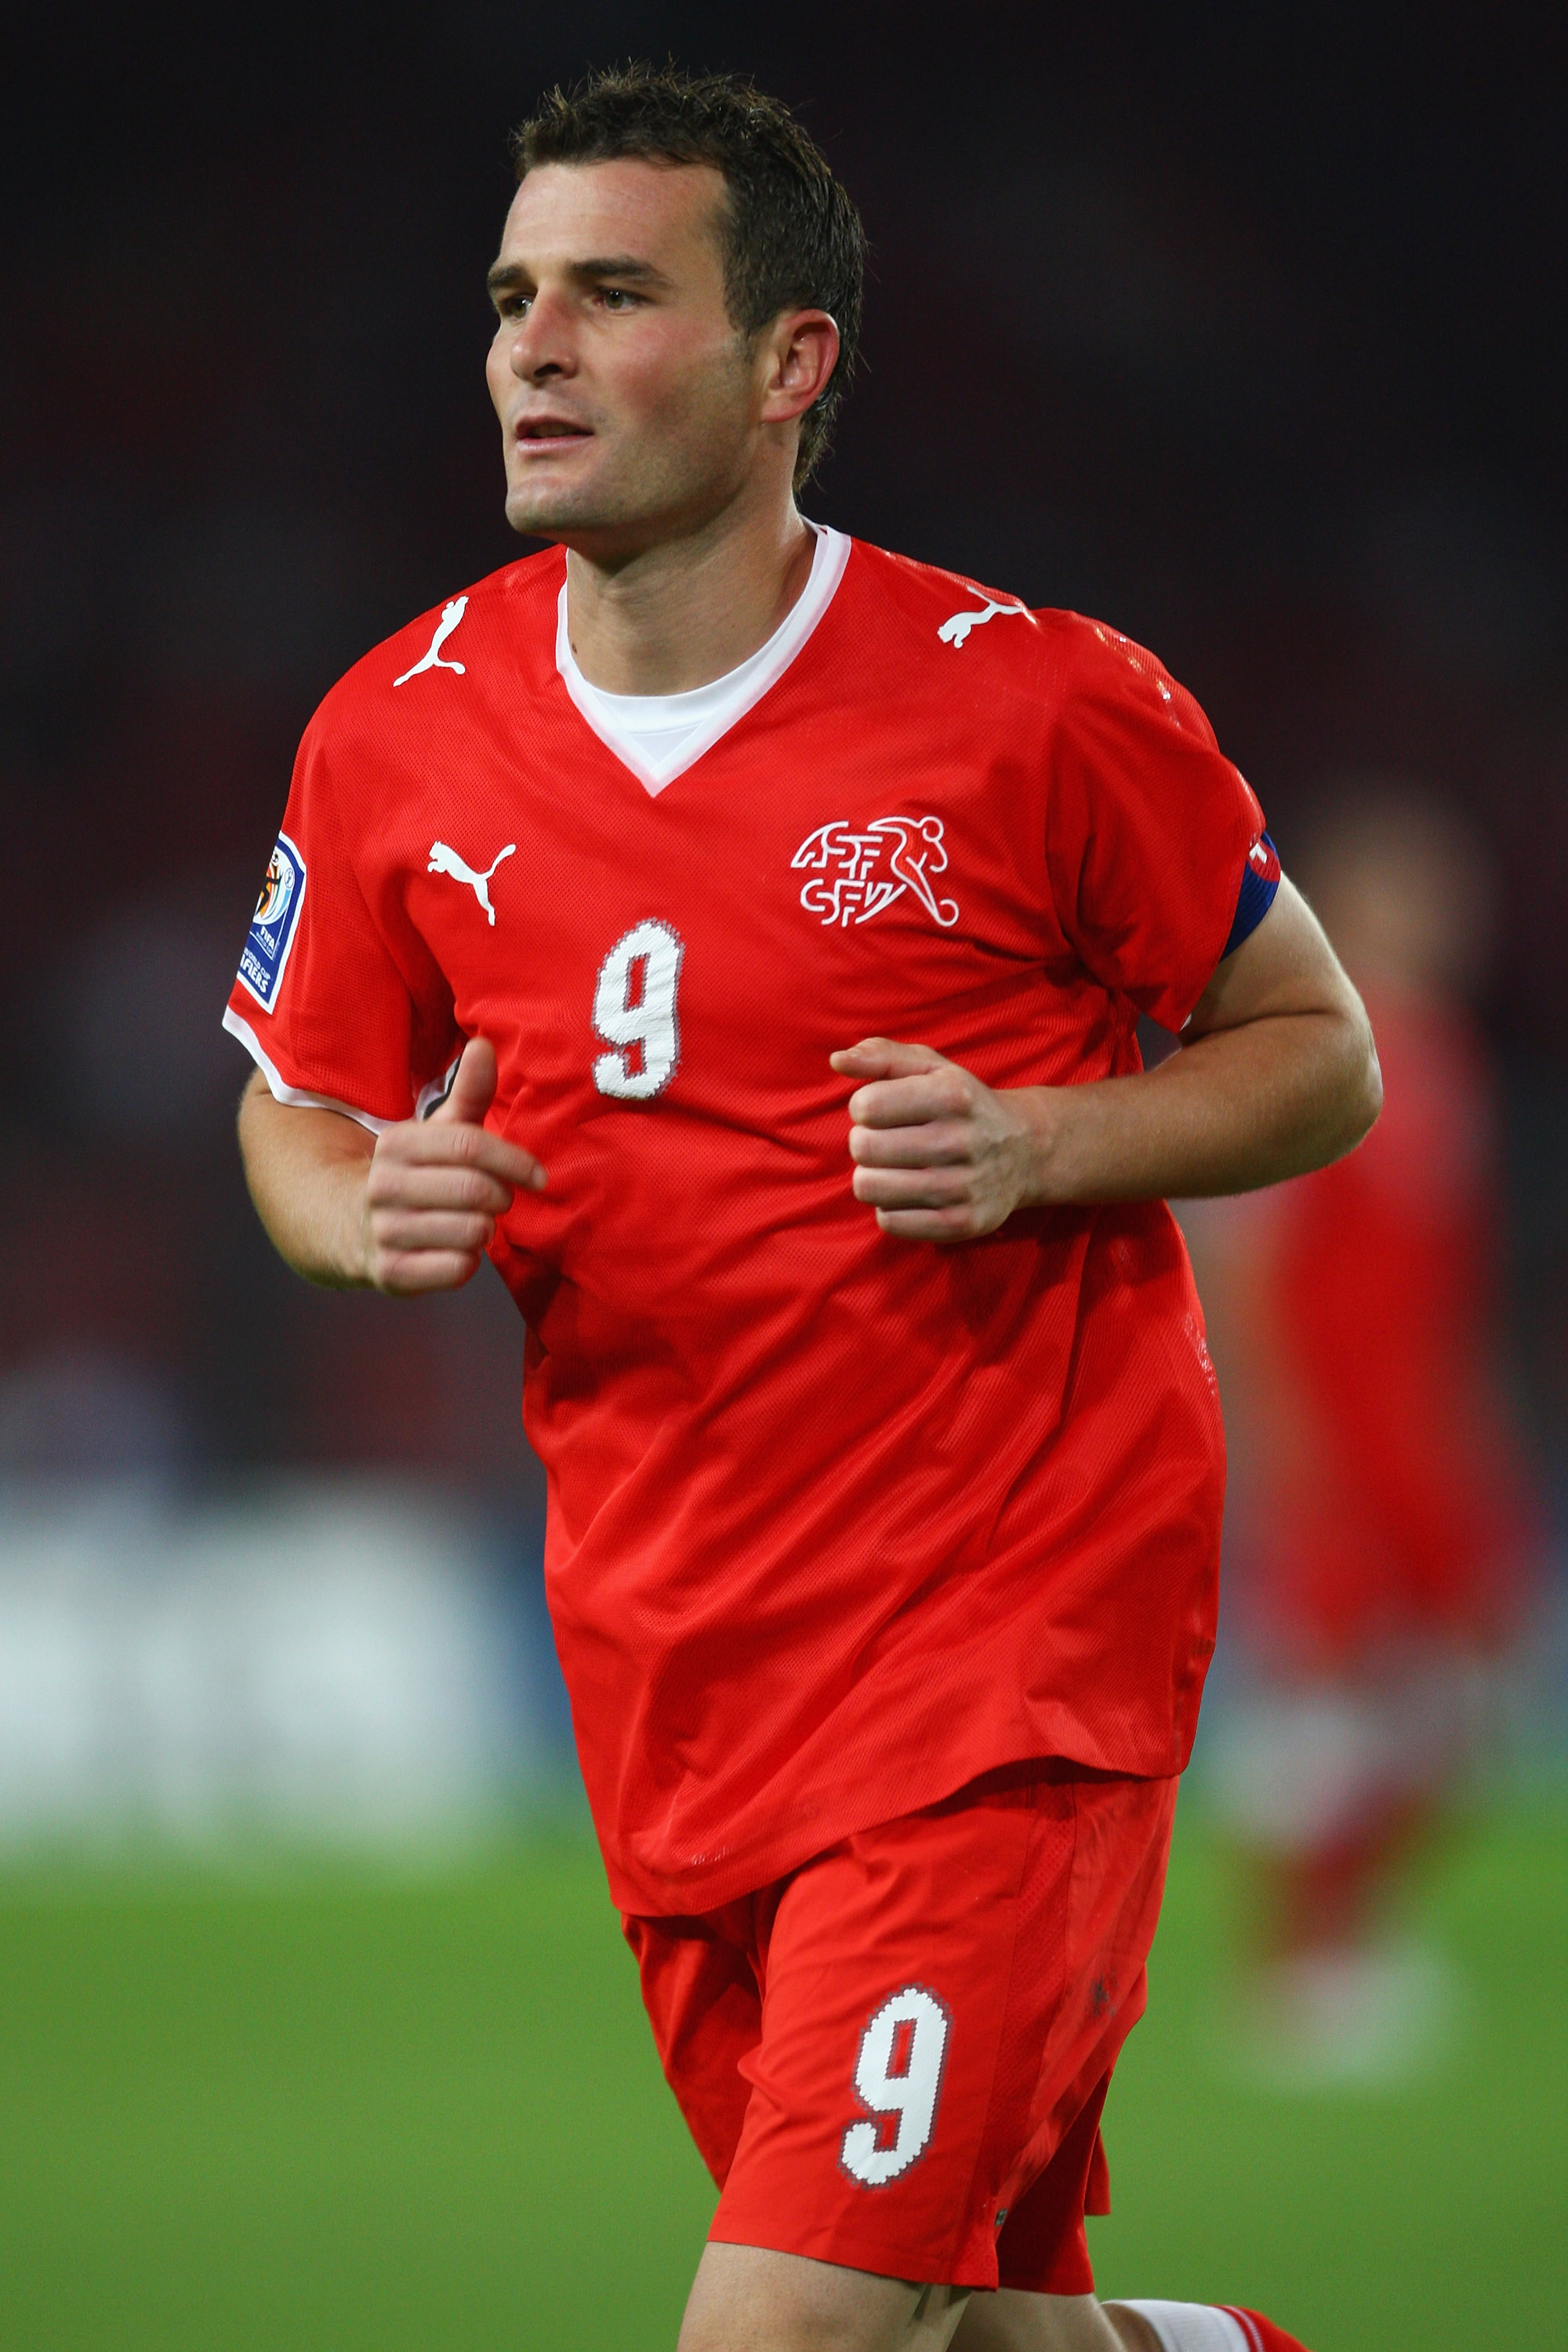 BASLE, SWITZERLAND - SEPTEMBER 05:  Alexander Frei of Switzerland during the FIFA 2010 World Cup Qualifying Group 2 match between Switzerland and Greece at the St.Jakob-Park Stadium on September 5, 2009 in Basle, Switzerland.  (Photo by Michael Steele/Get